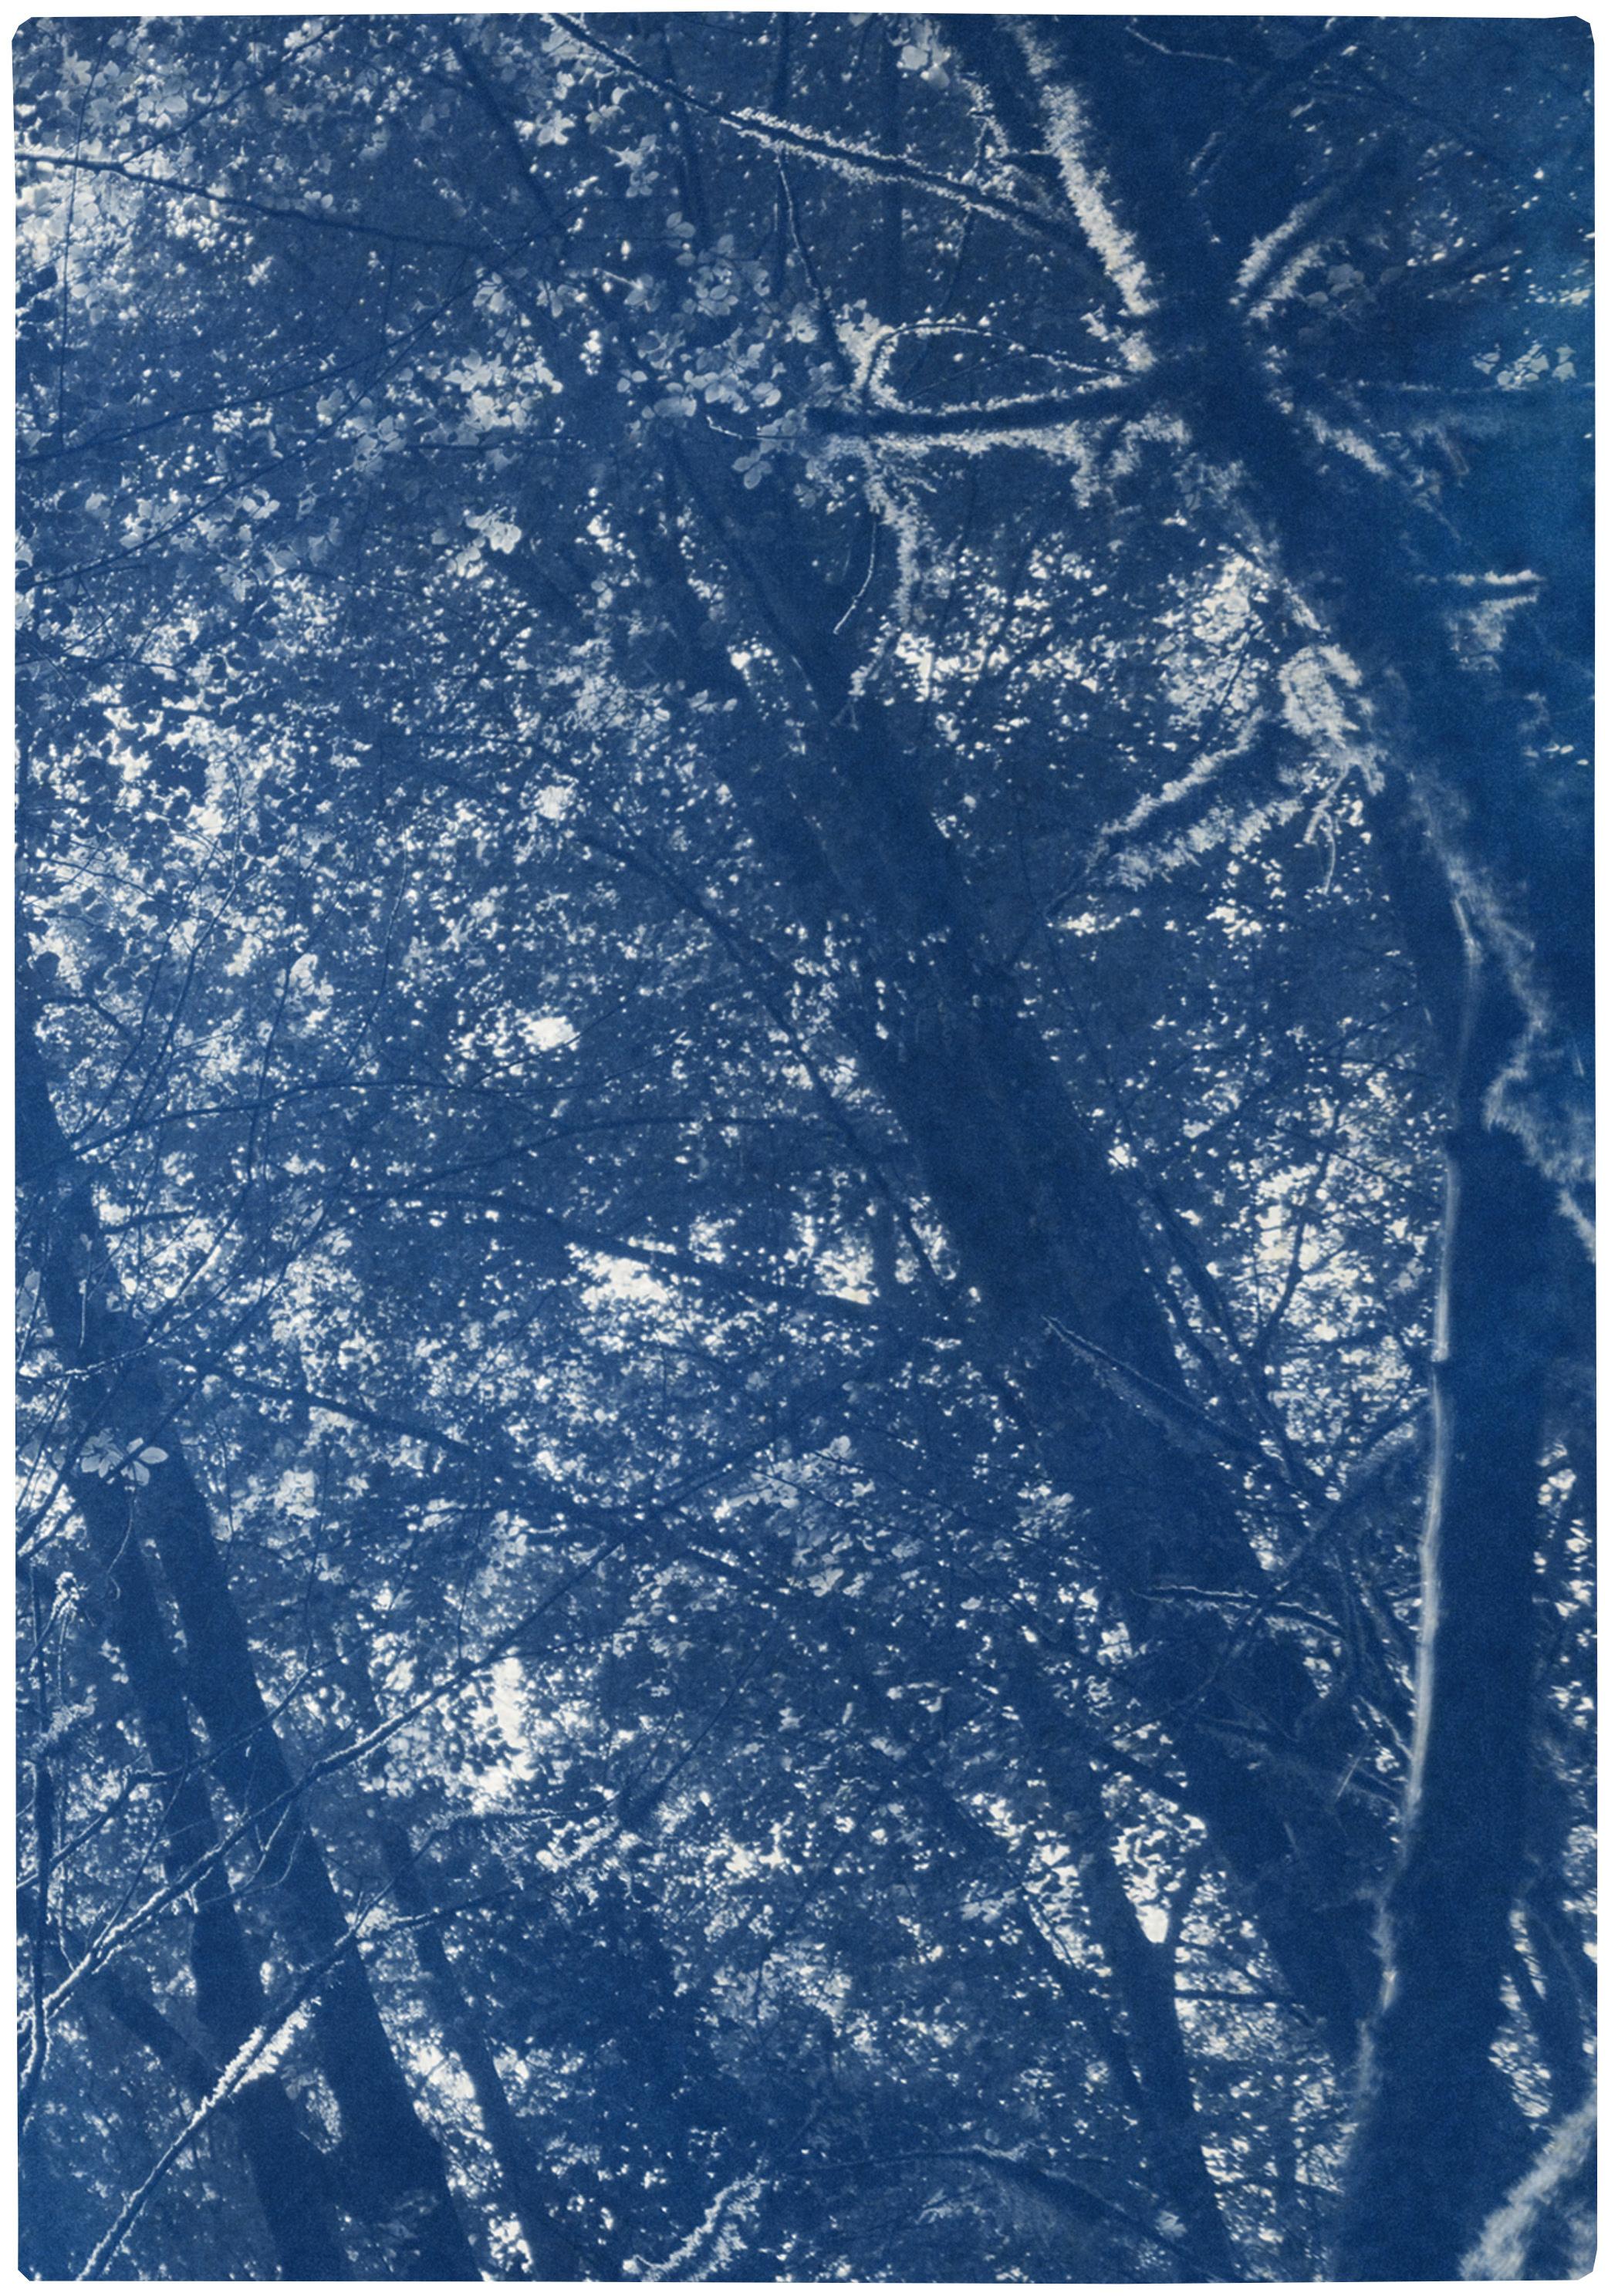 Blue Tones Forest Triptych, Looking Up Through The Trees, Limited Edition Cyano - Realist Print by Kind of Cyan